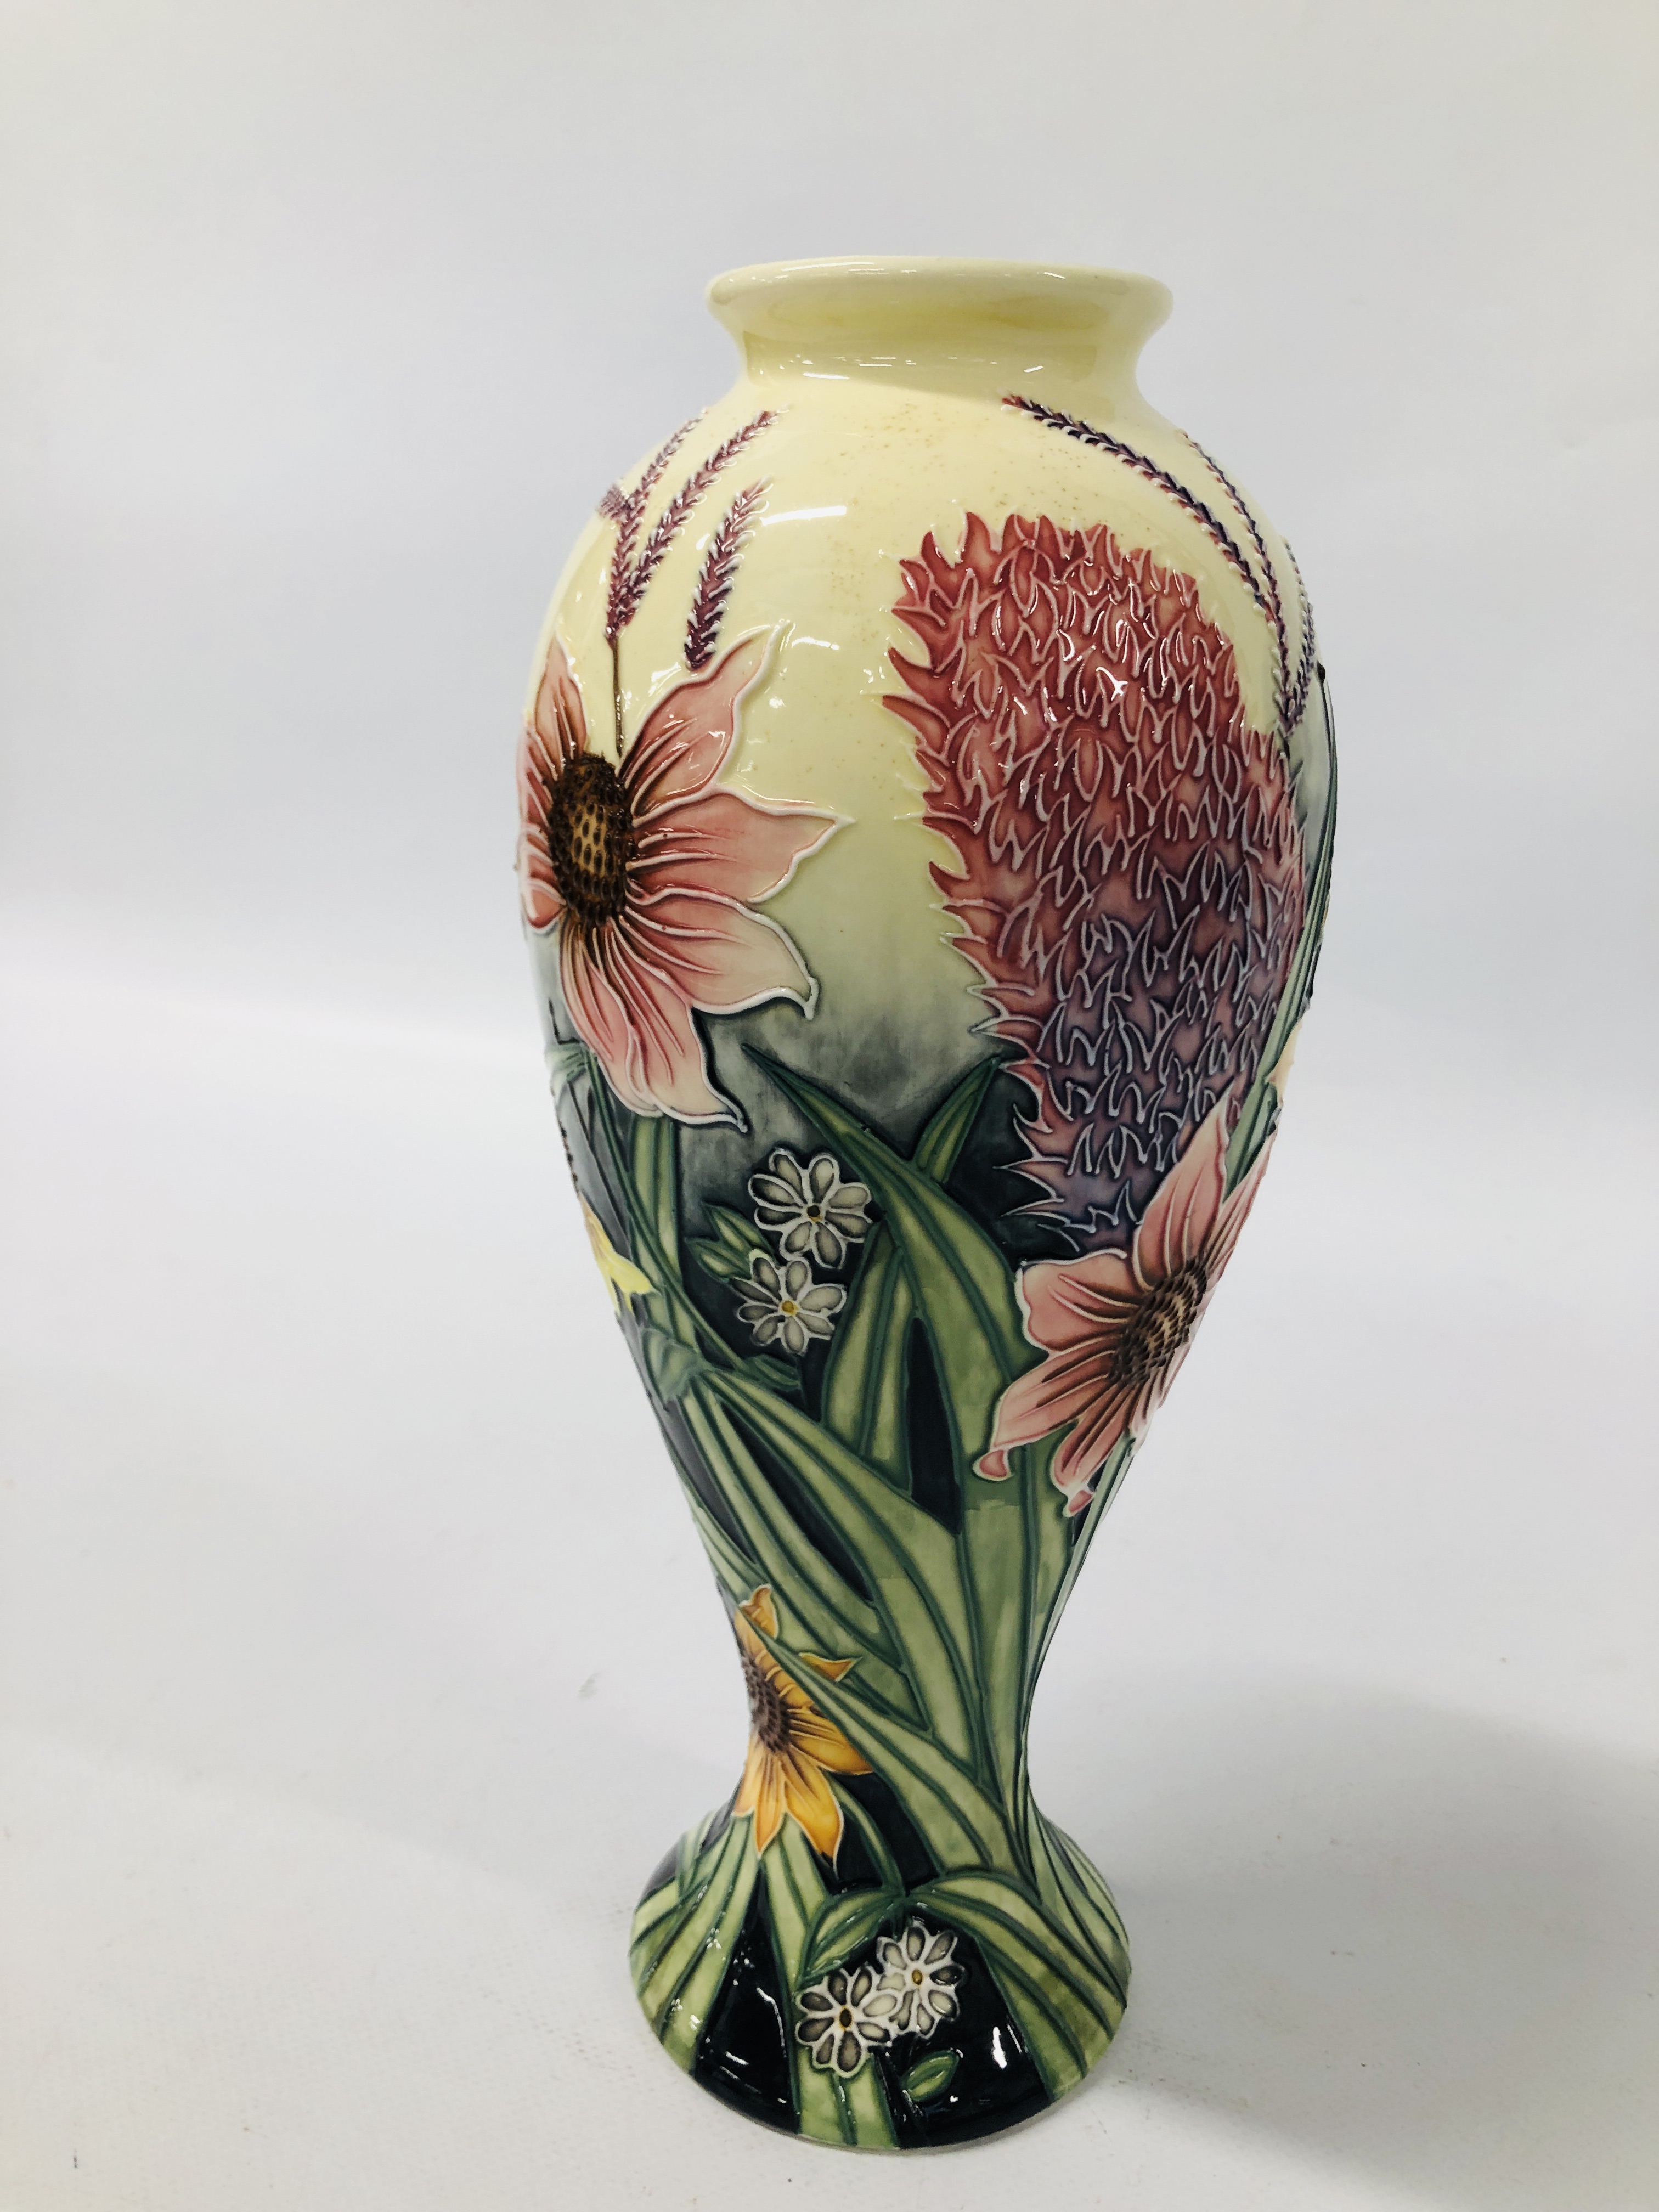 OLD TUPTON WARE HAND PAINTED FLORAL DECORATED VASE H 28CM. - Image 5 of 7